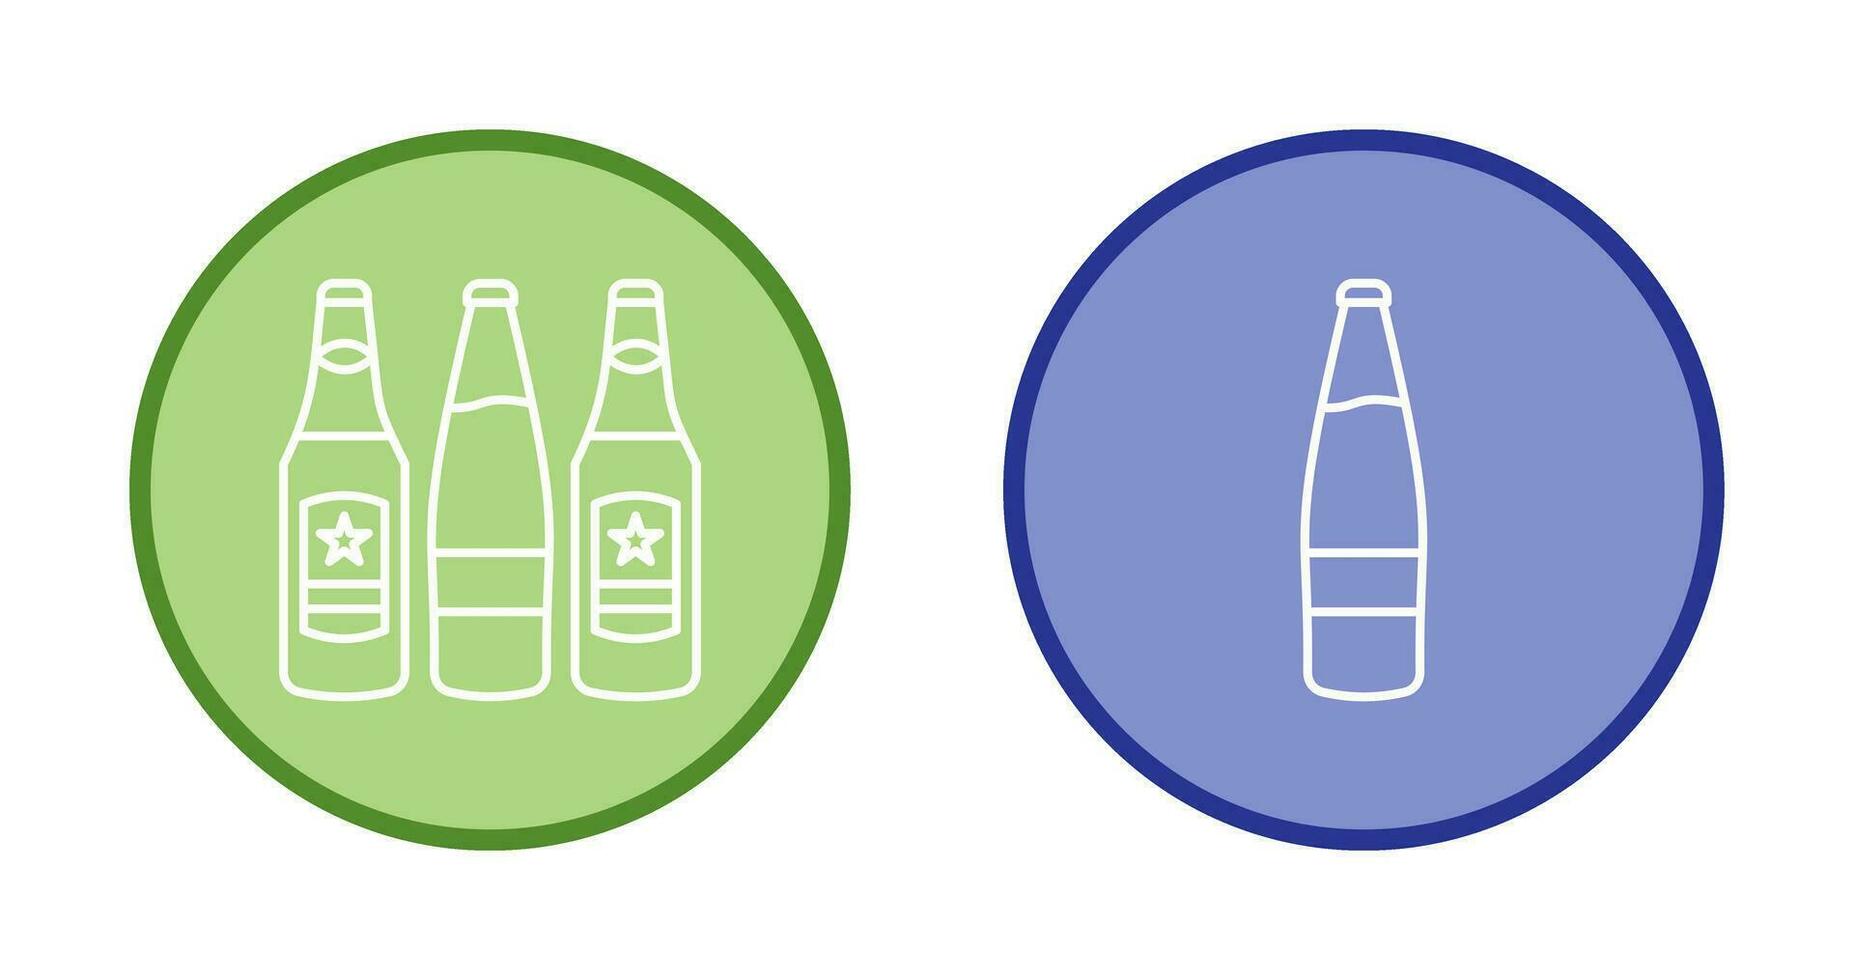 Beer Bottles and alcohol Icon vector